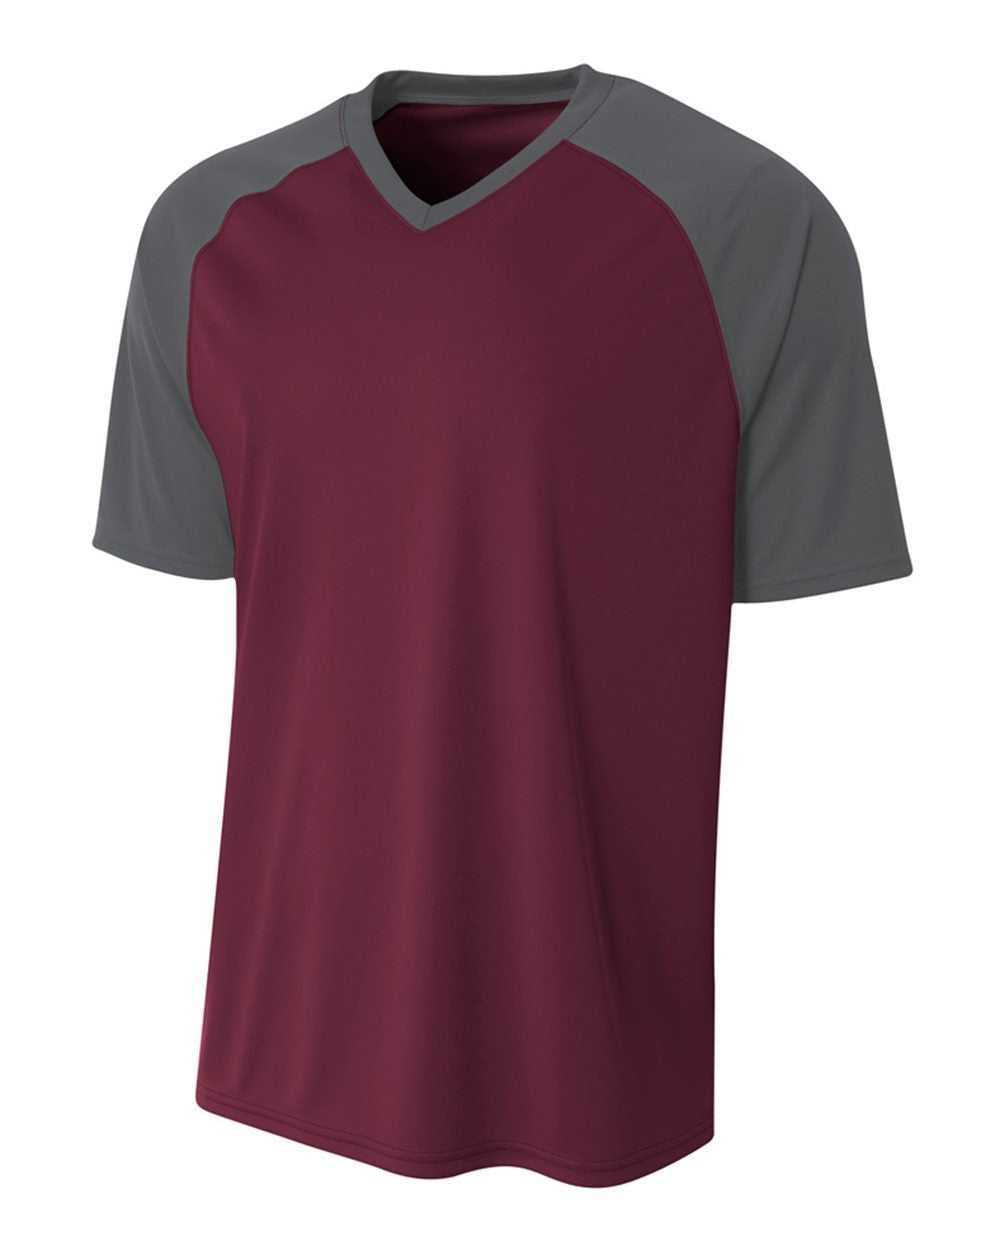 A4 NB3373 Youth Strike Jersey - Maroon Graphite - HIT a Double